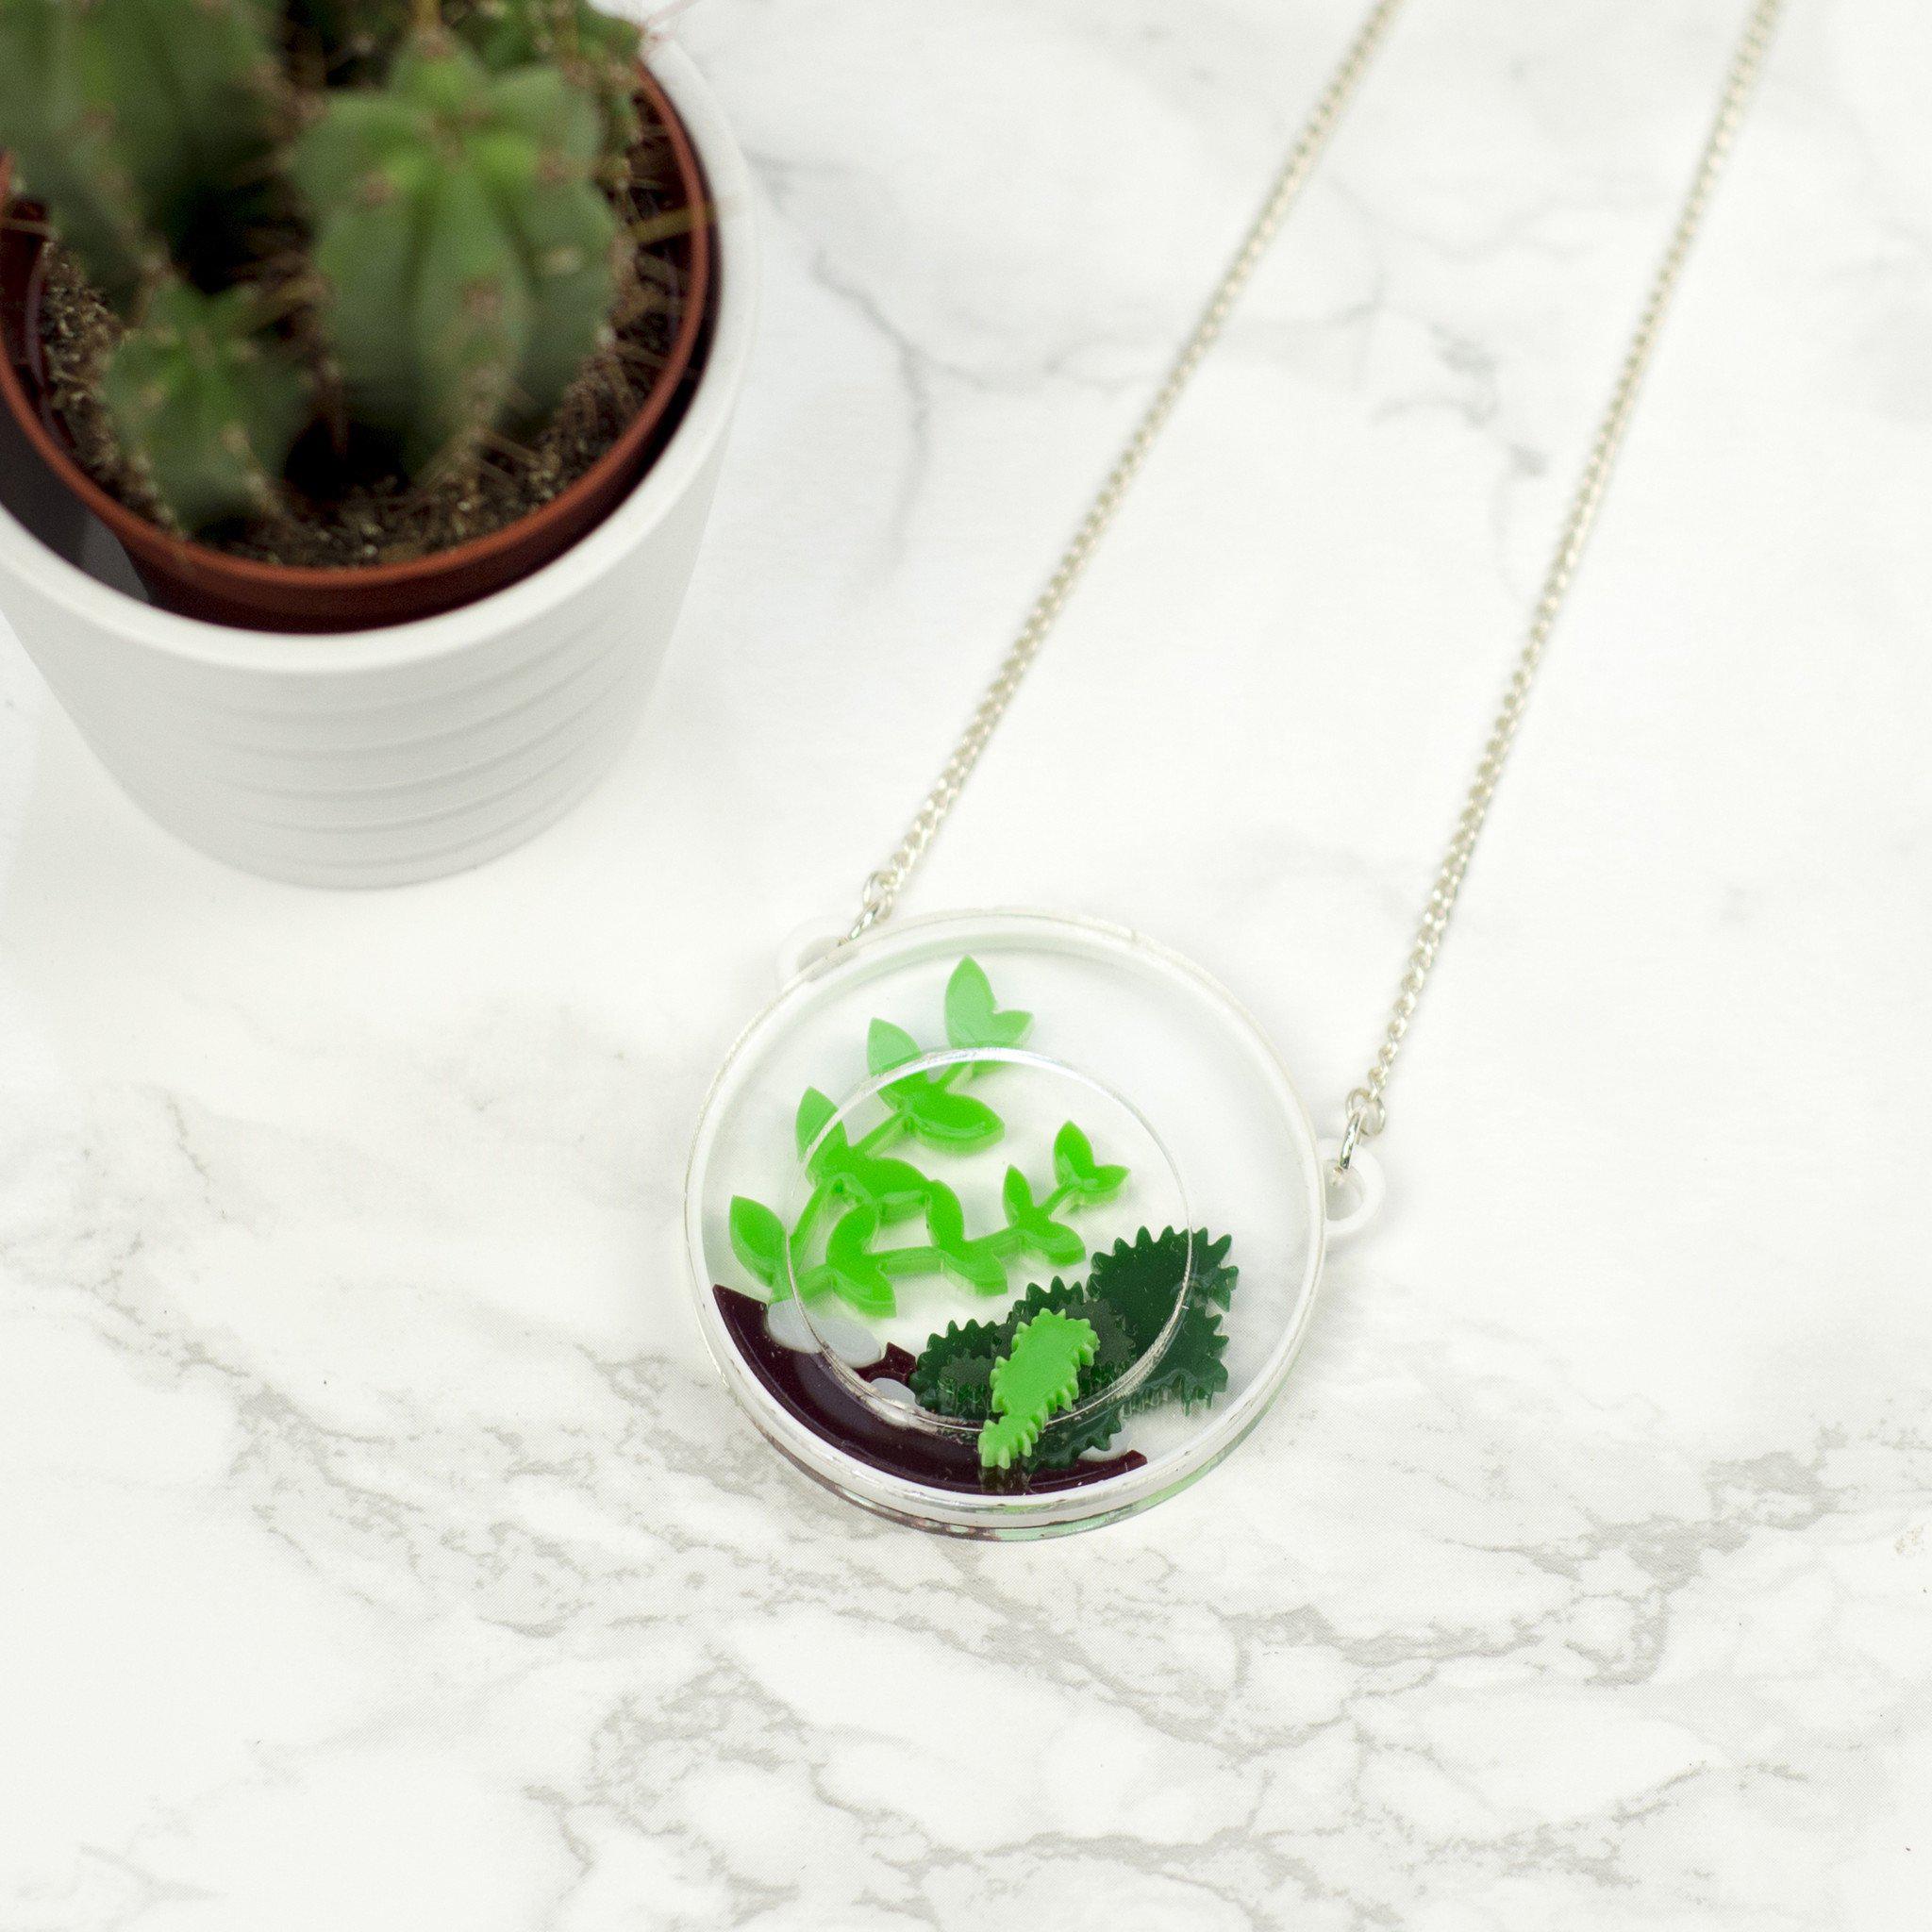 Round Terrarium Necklace with miniature plants and cacti